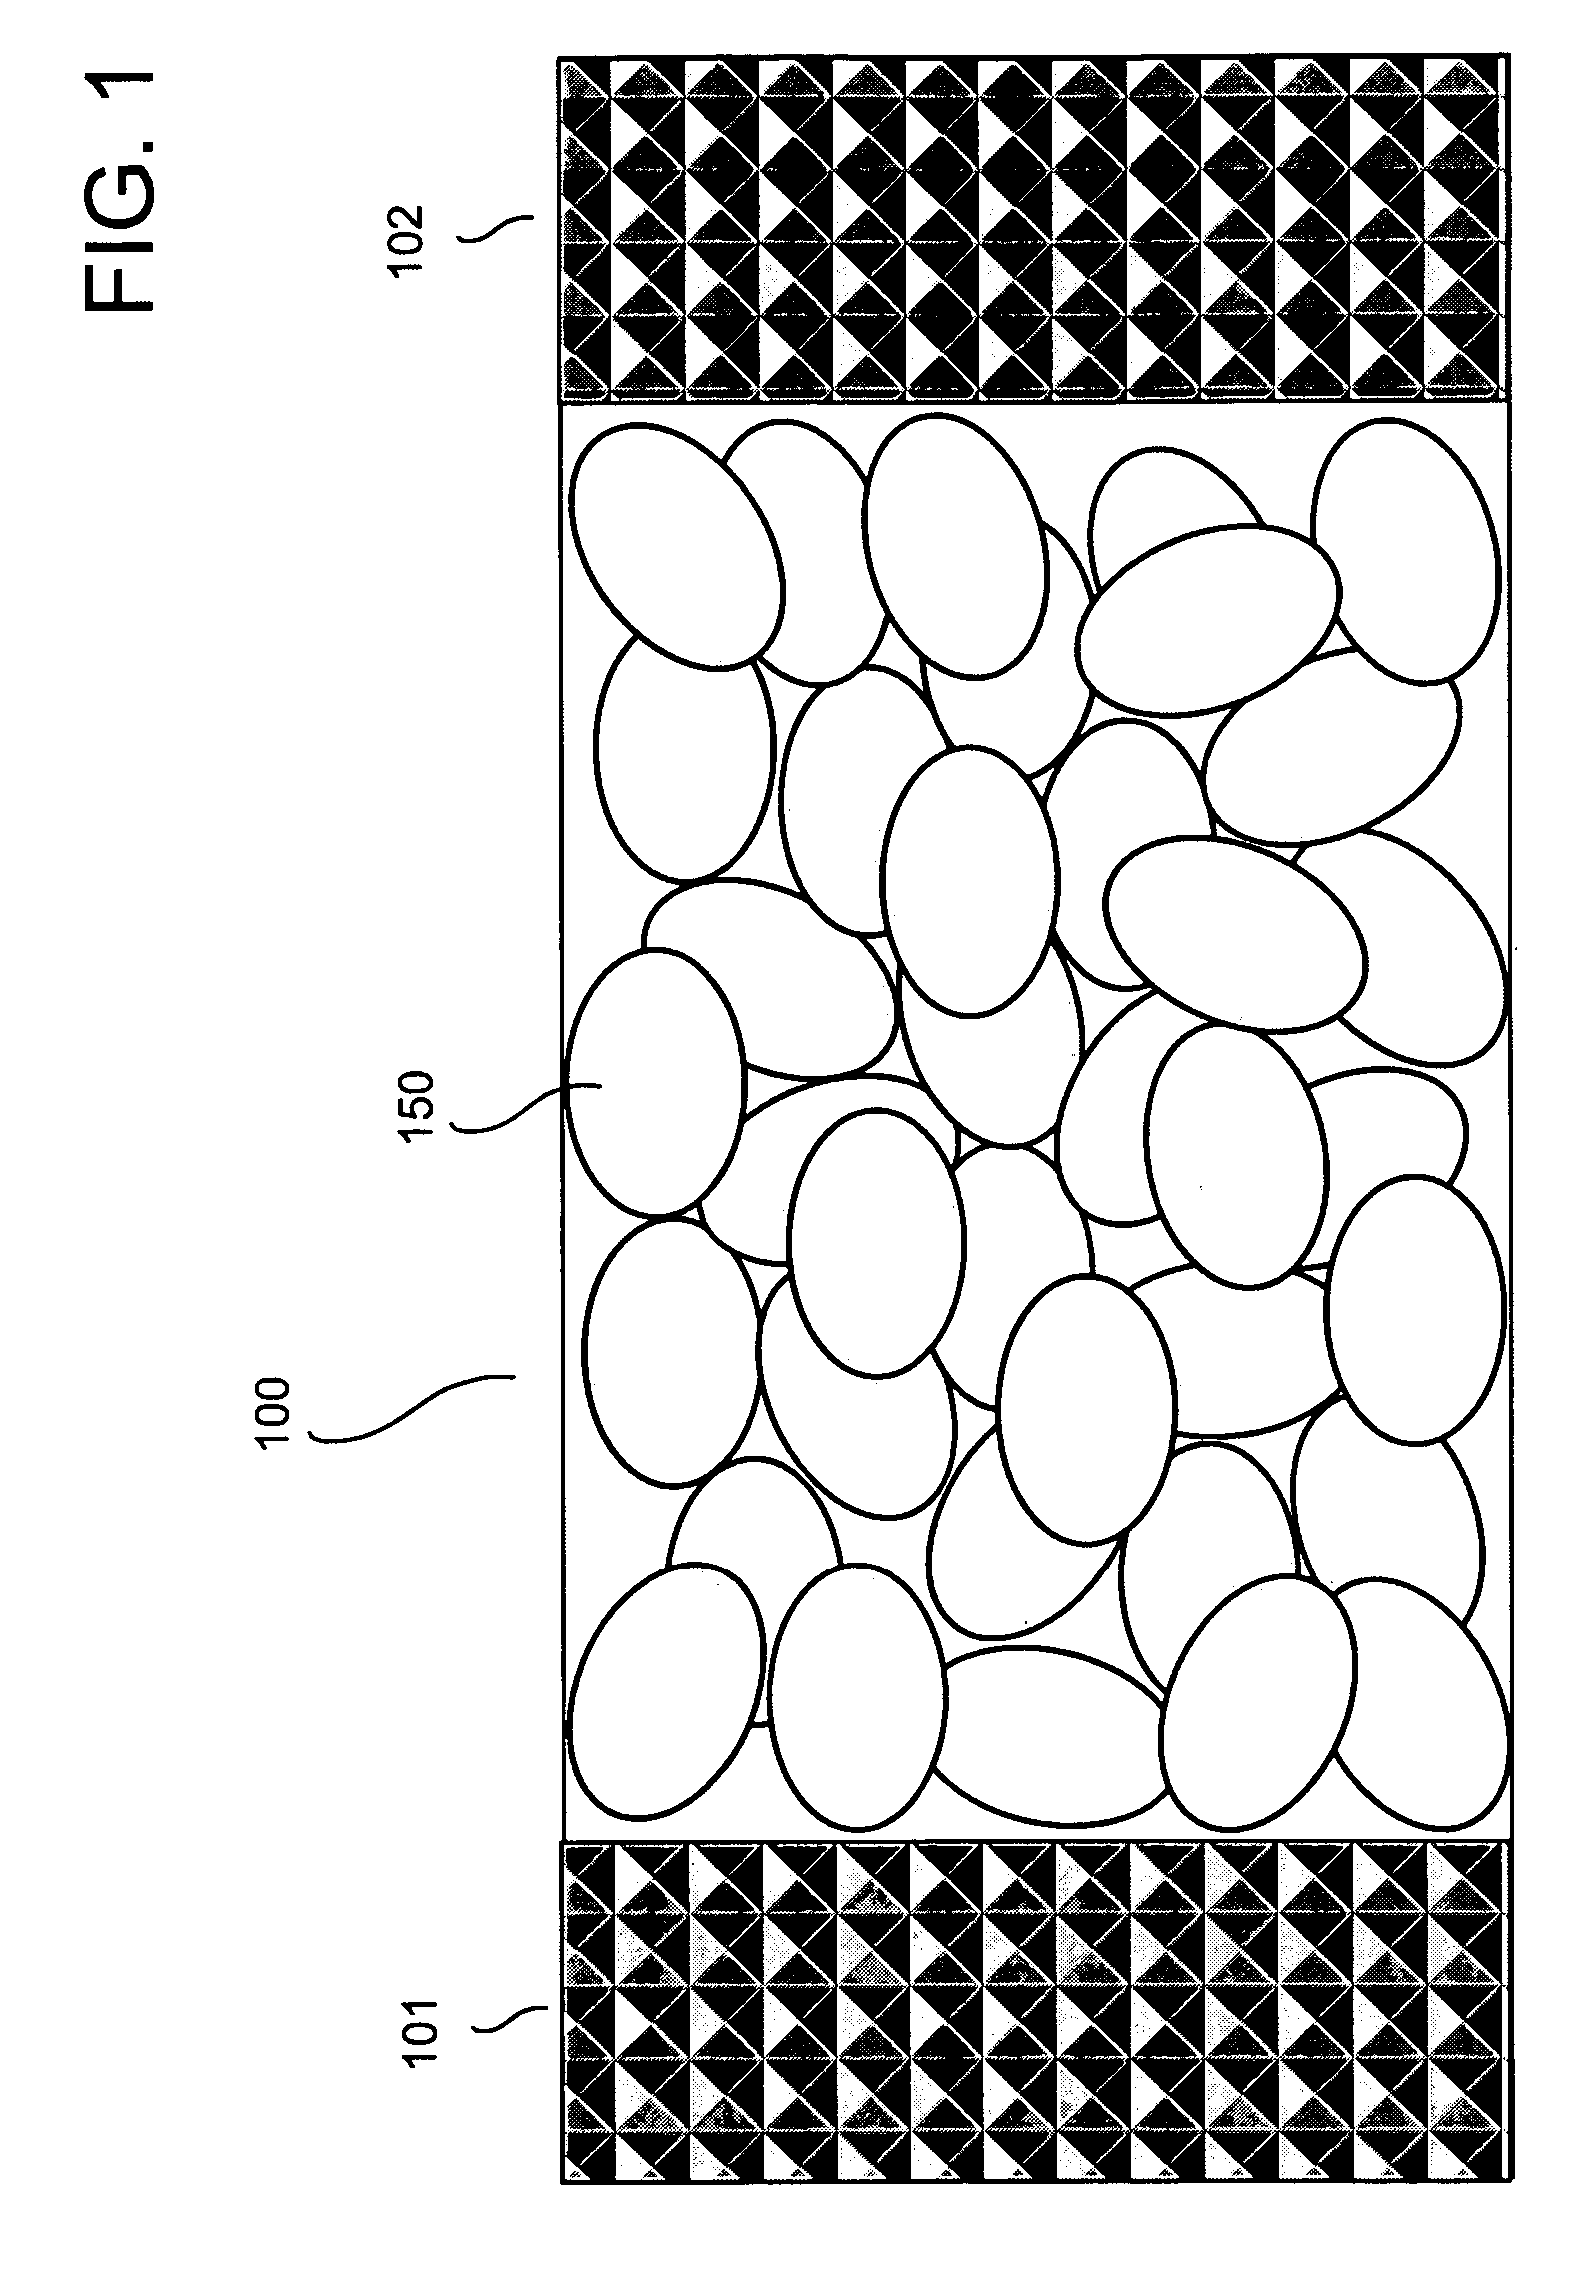 Conformable thermal pack apparatus, manufacture and method